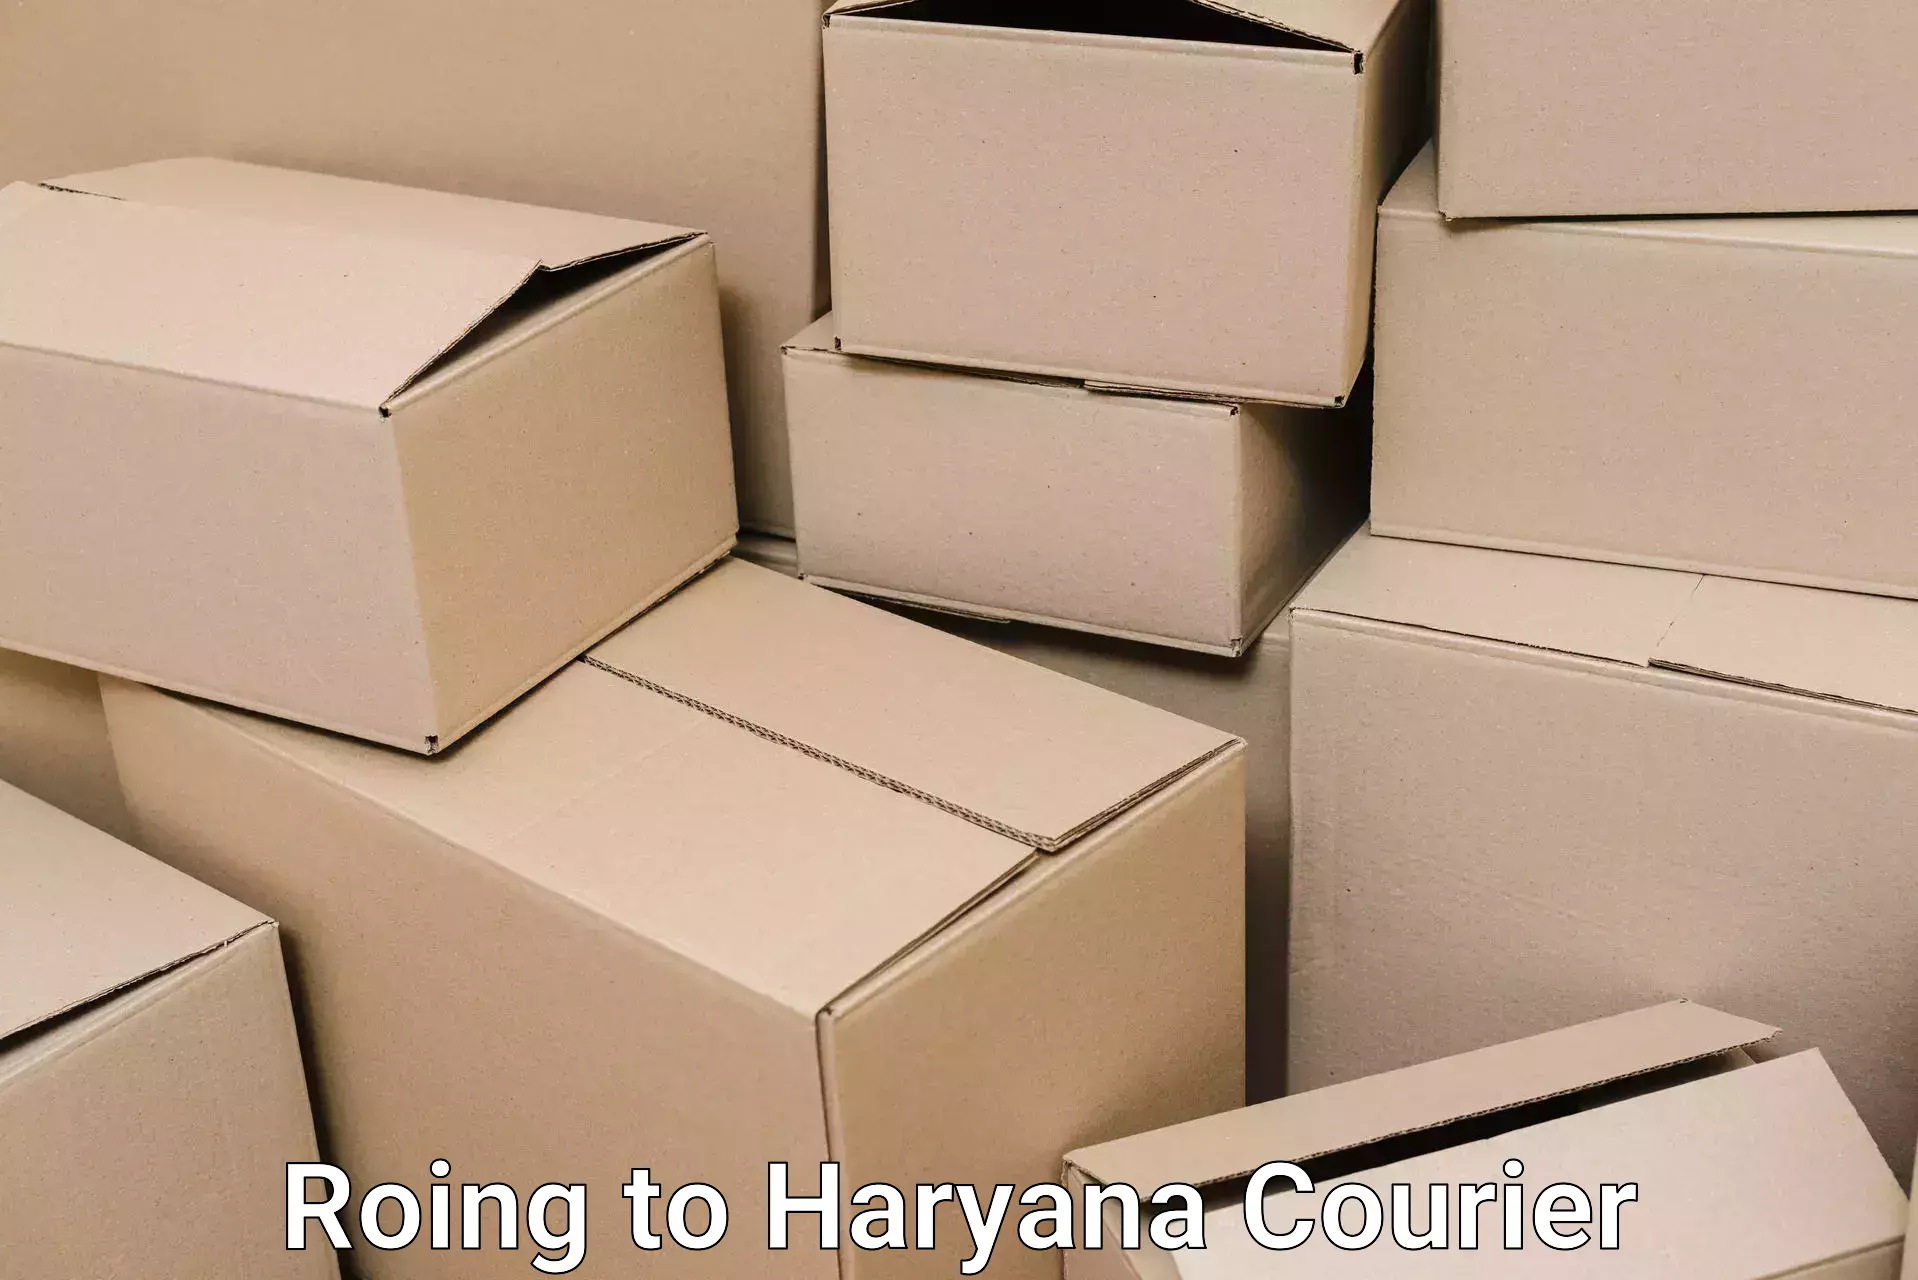 Furniture delivery service Roing to Haryana